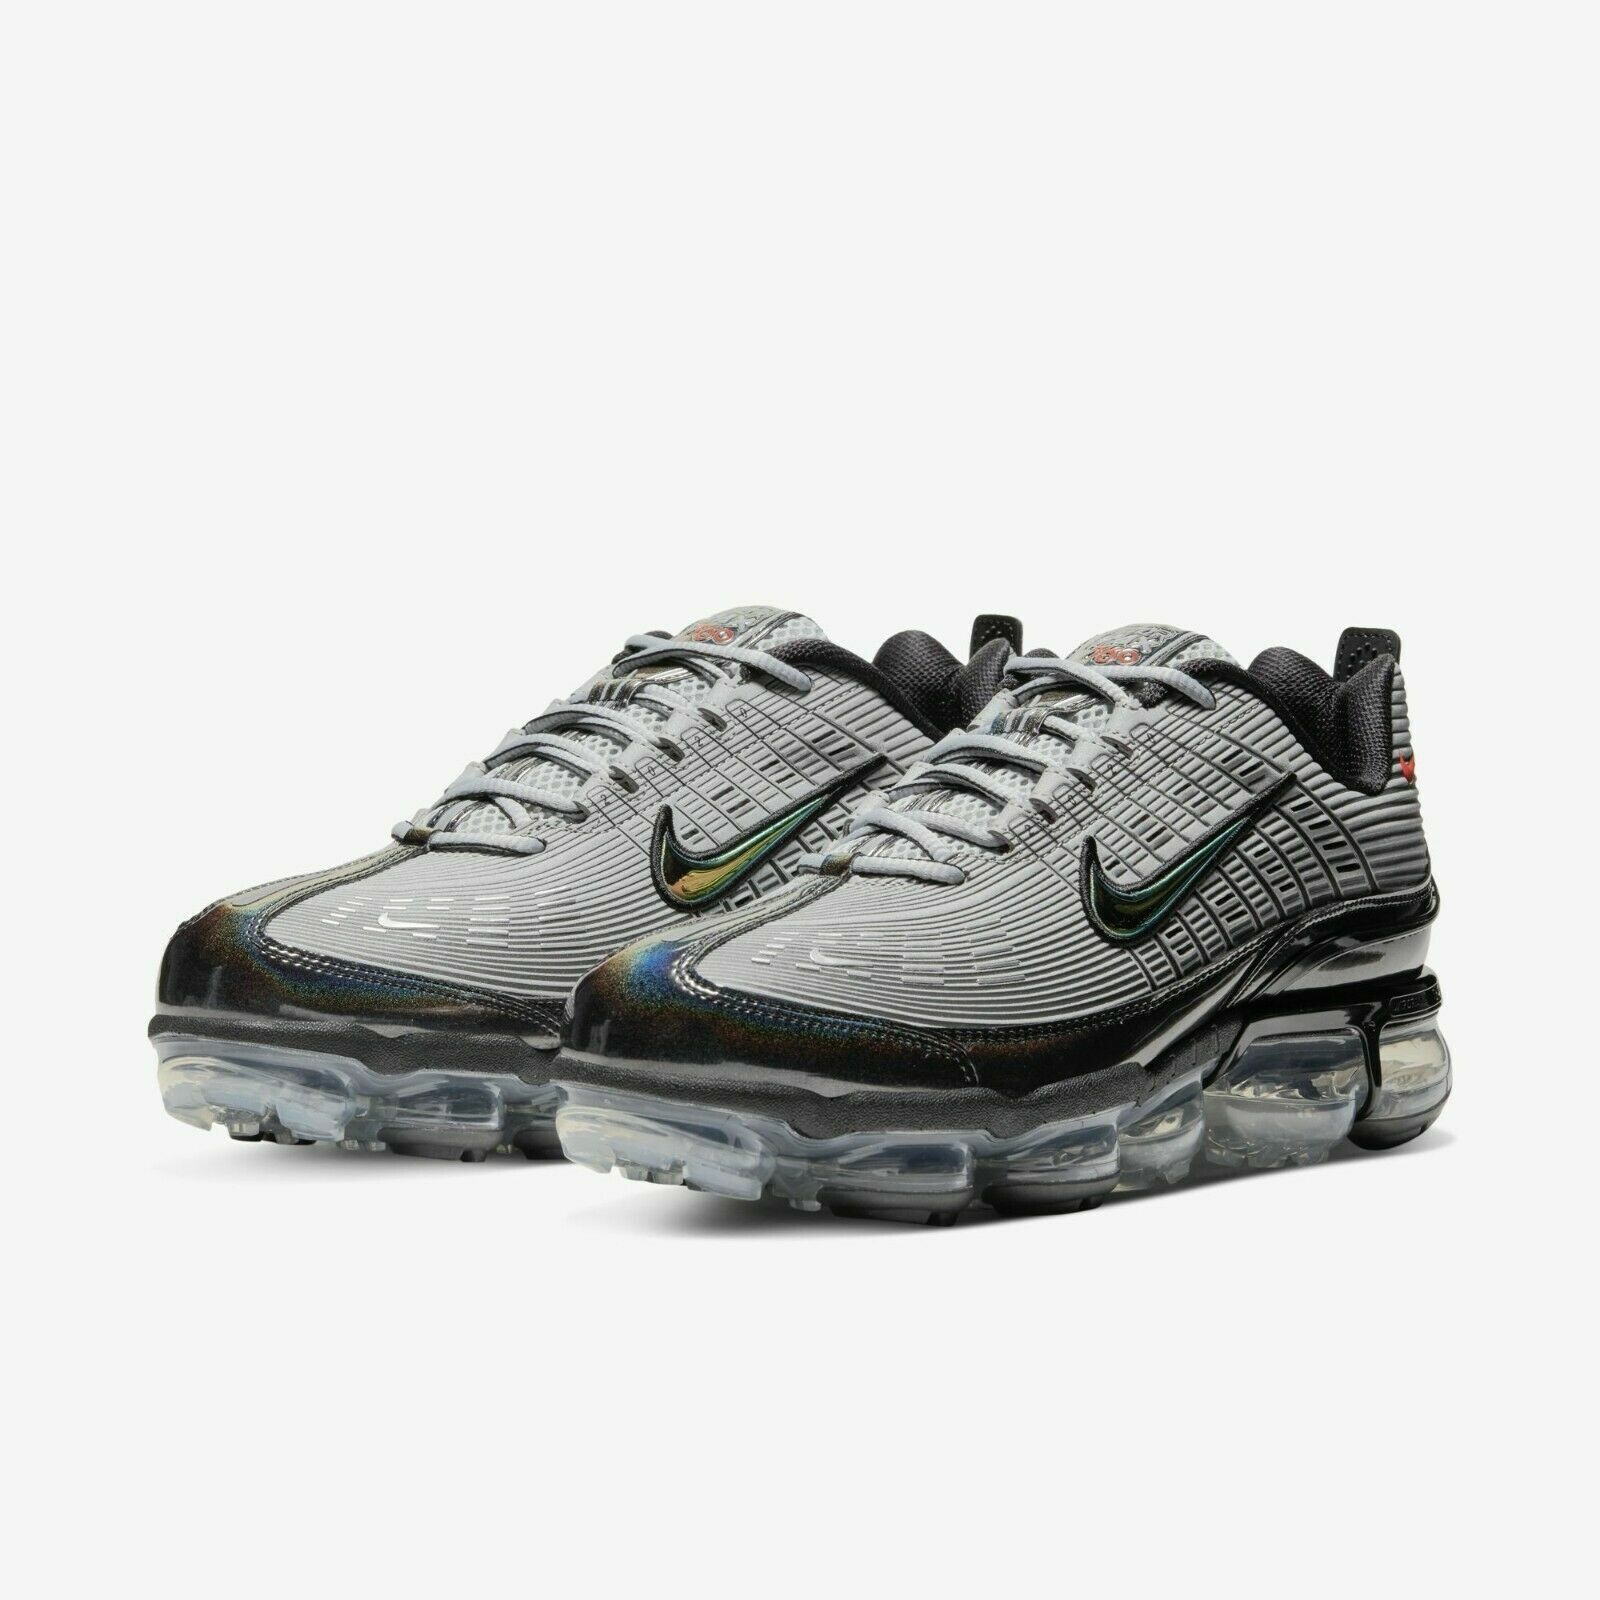 7.5 in womens to mens nike